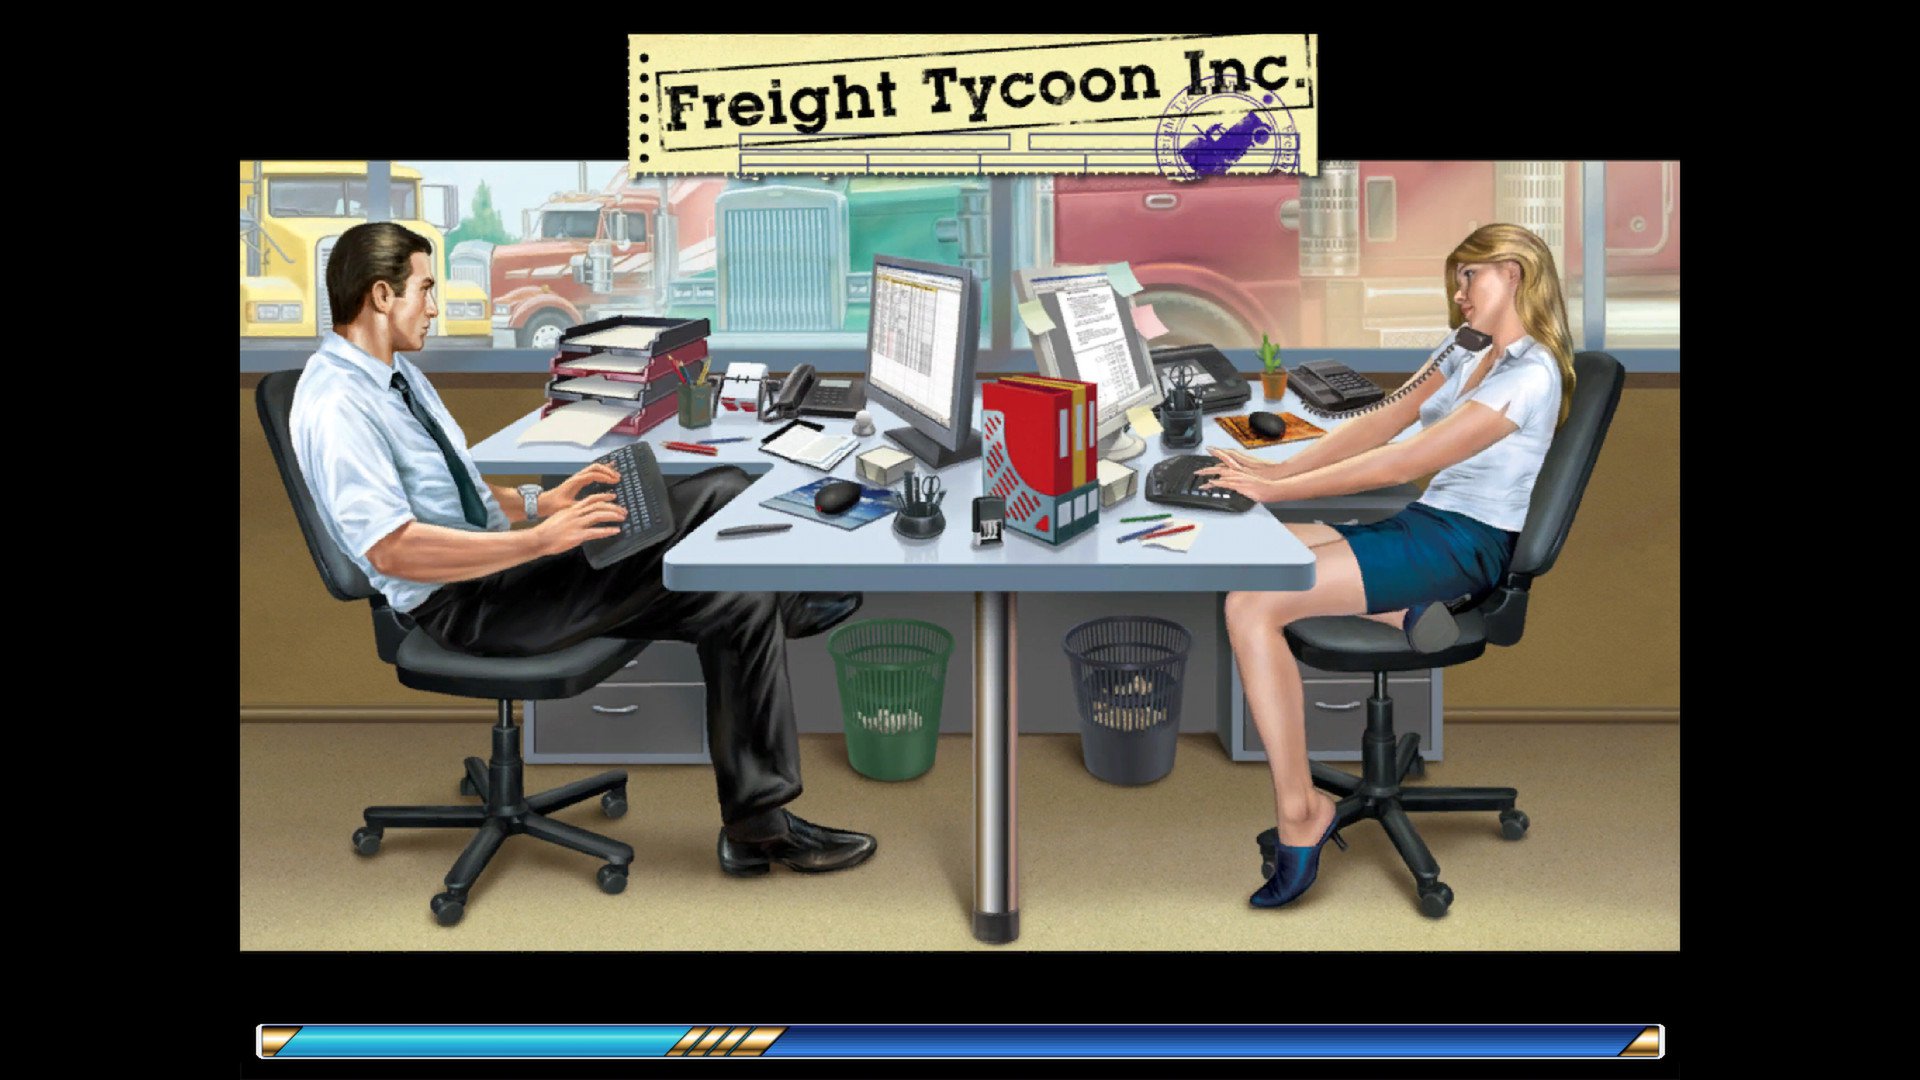 Freight Tycoon Inc 9